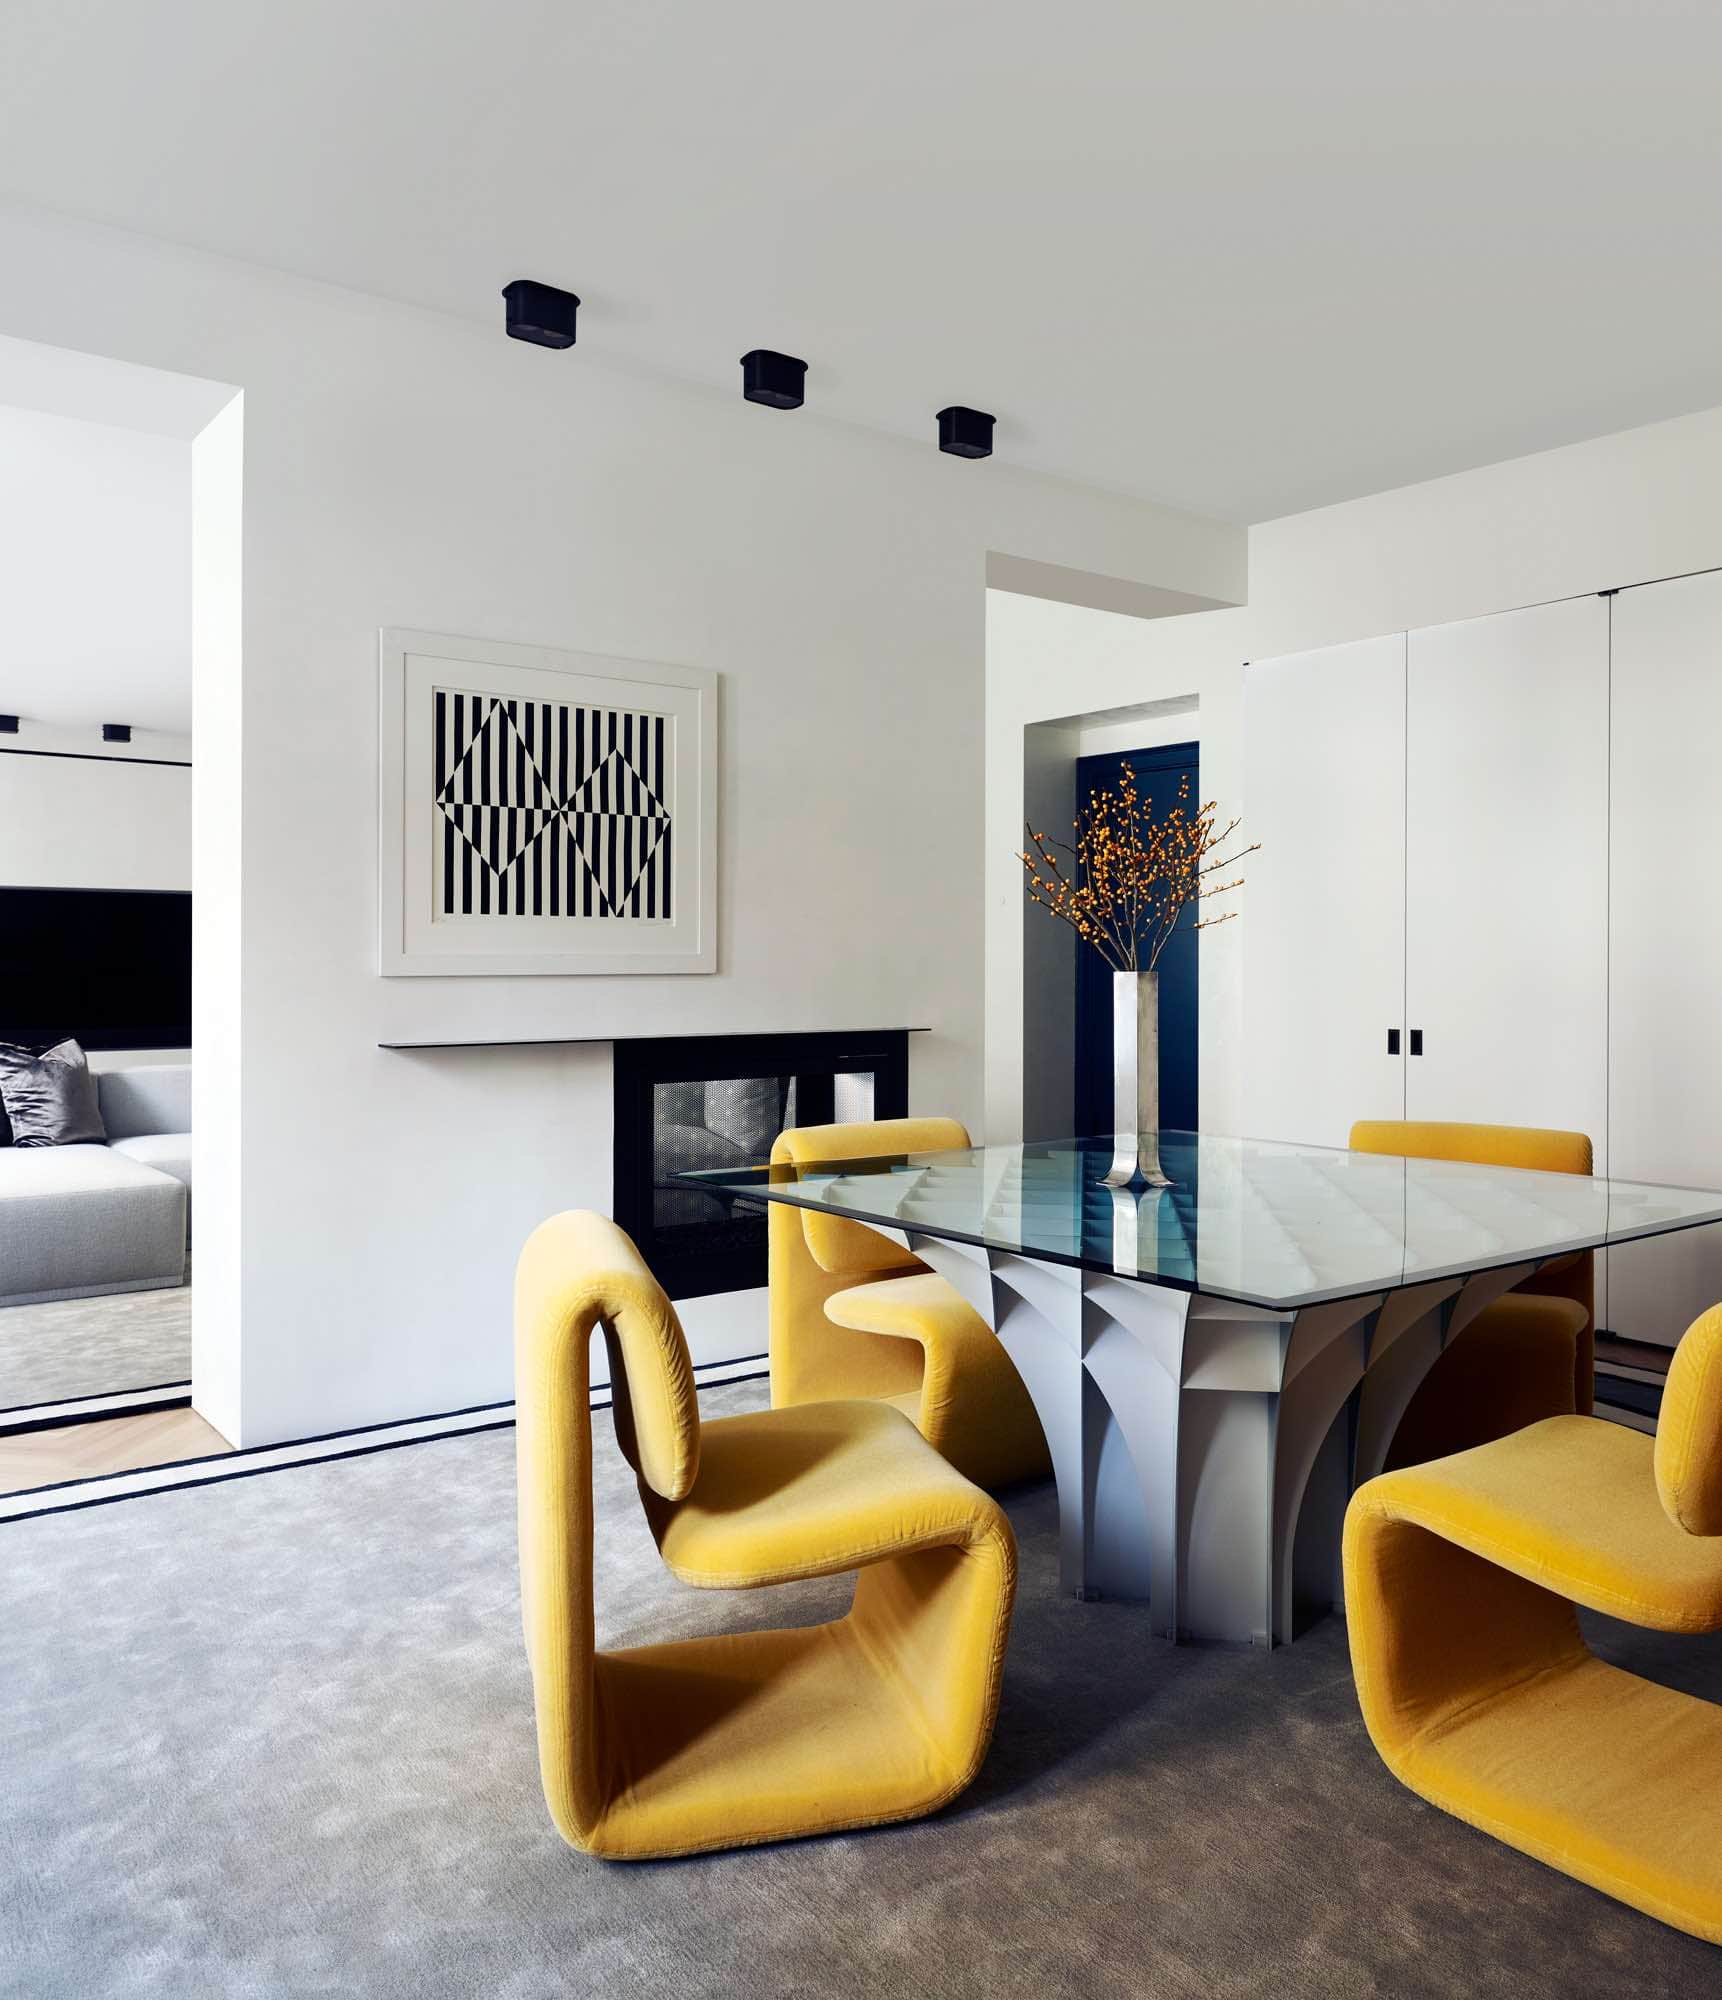 Shown in this image is a view of the dining room designed by Carol Egan featuring the "Cathedrale" table by Pierre Paulin and "Programme 1500" chairs by Etienne-Henri Martin upholstered in a yellow wool mohair fabric by Claremont fabrics.  The artwork above the fireplace is a Silkscreen: "Black & White" by Carmen Herrera.  The area rug is a design by Eric Schmitt Studio.